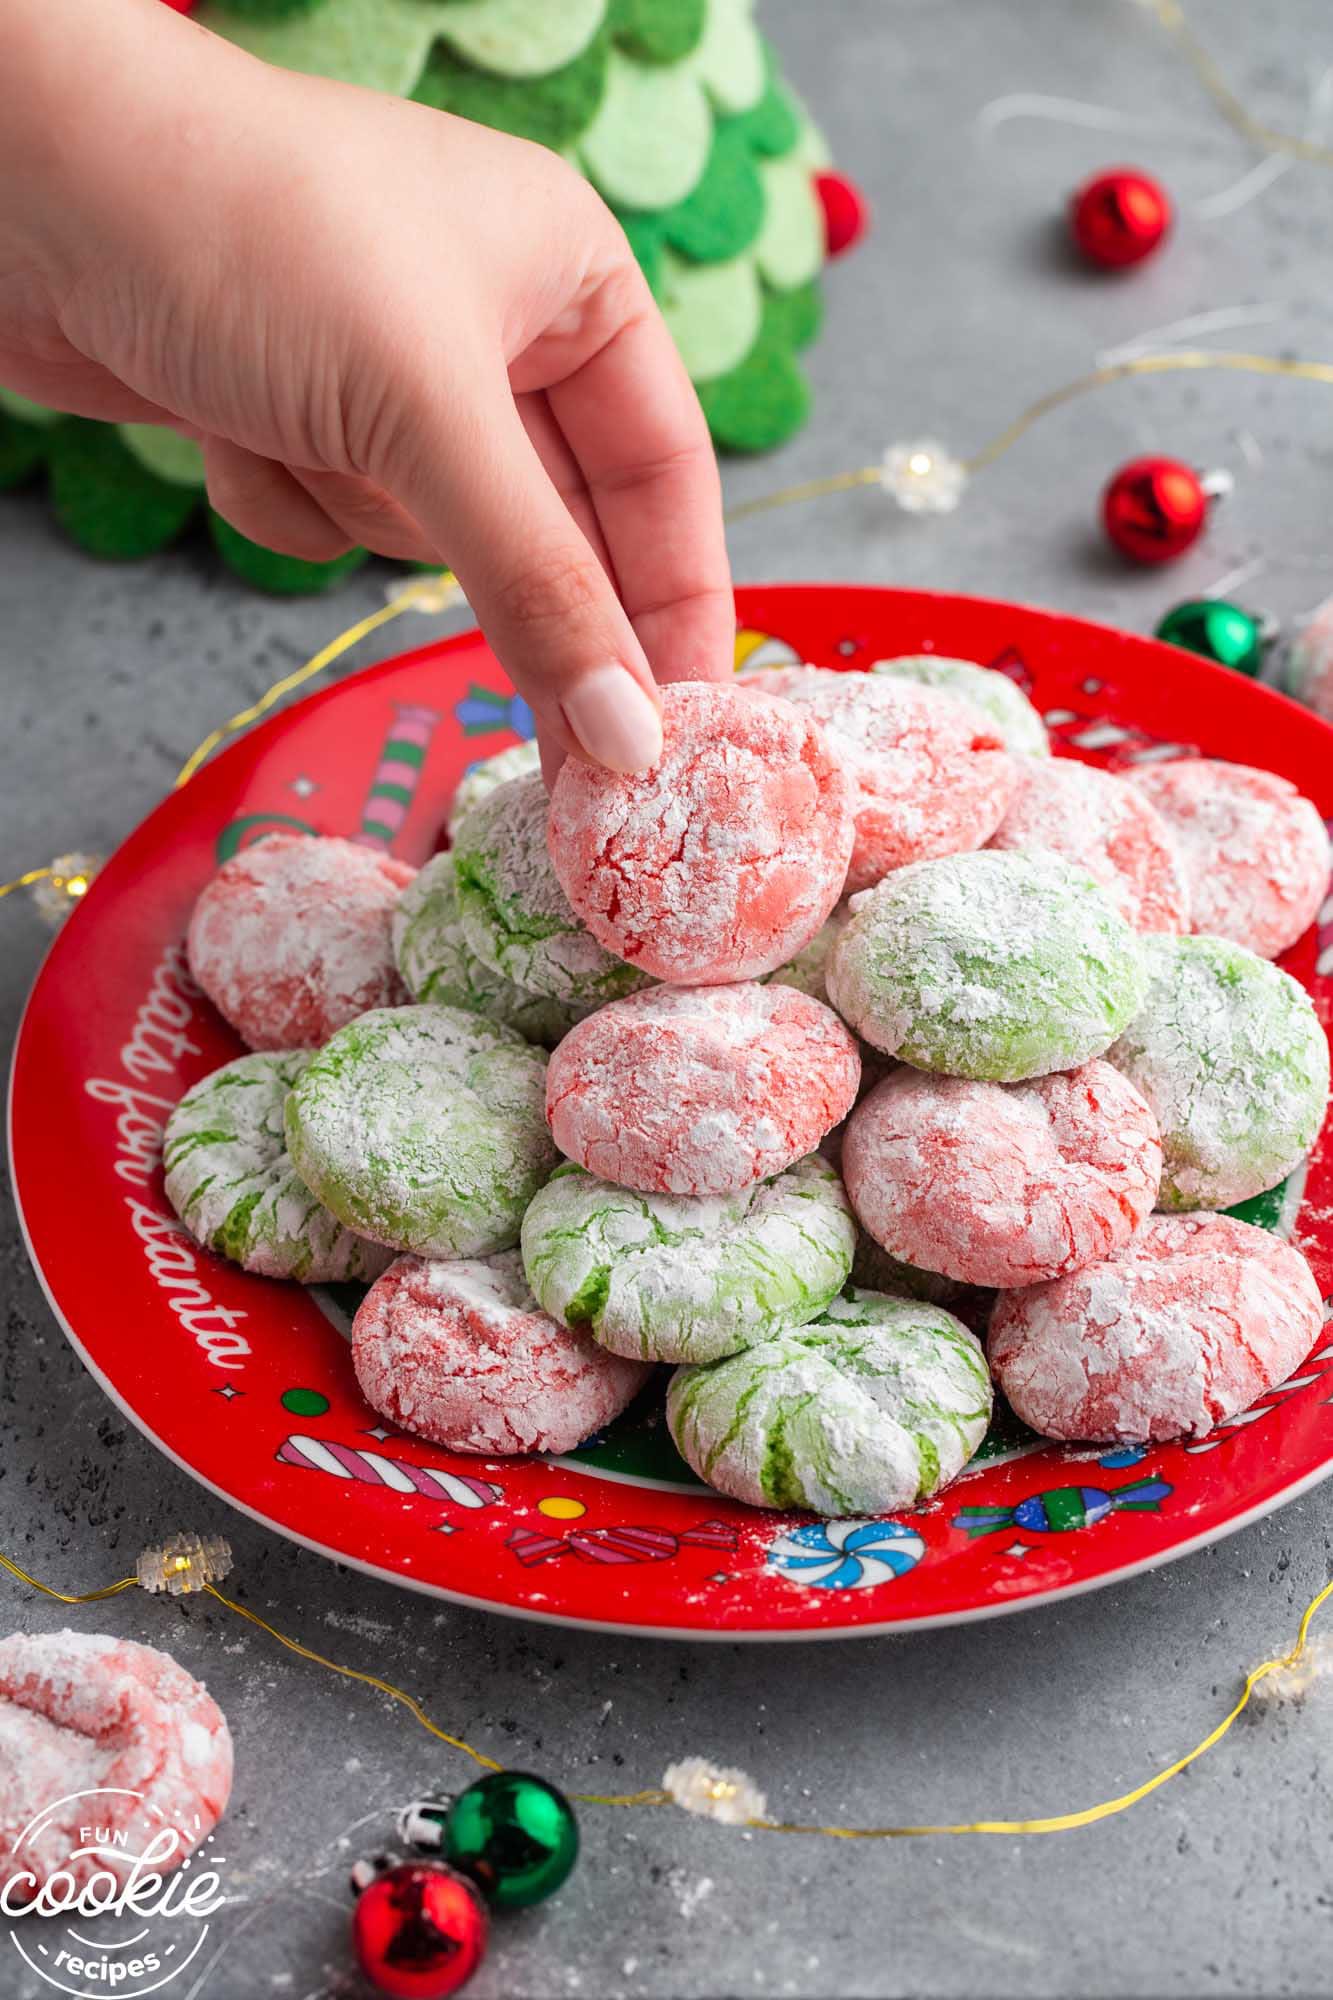 Taking a red Christmas crinkle cookie from a cookie tray